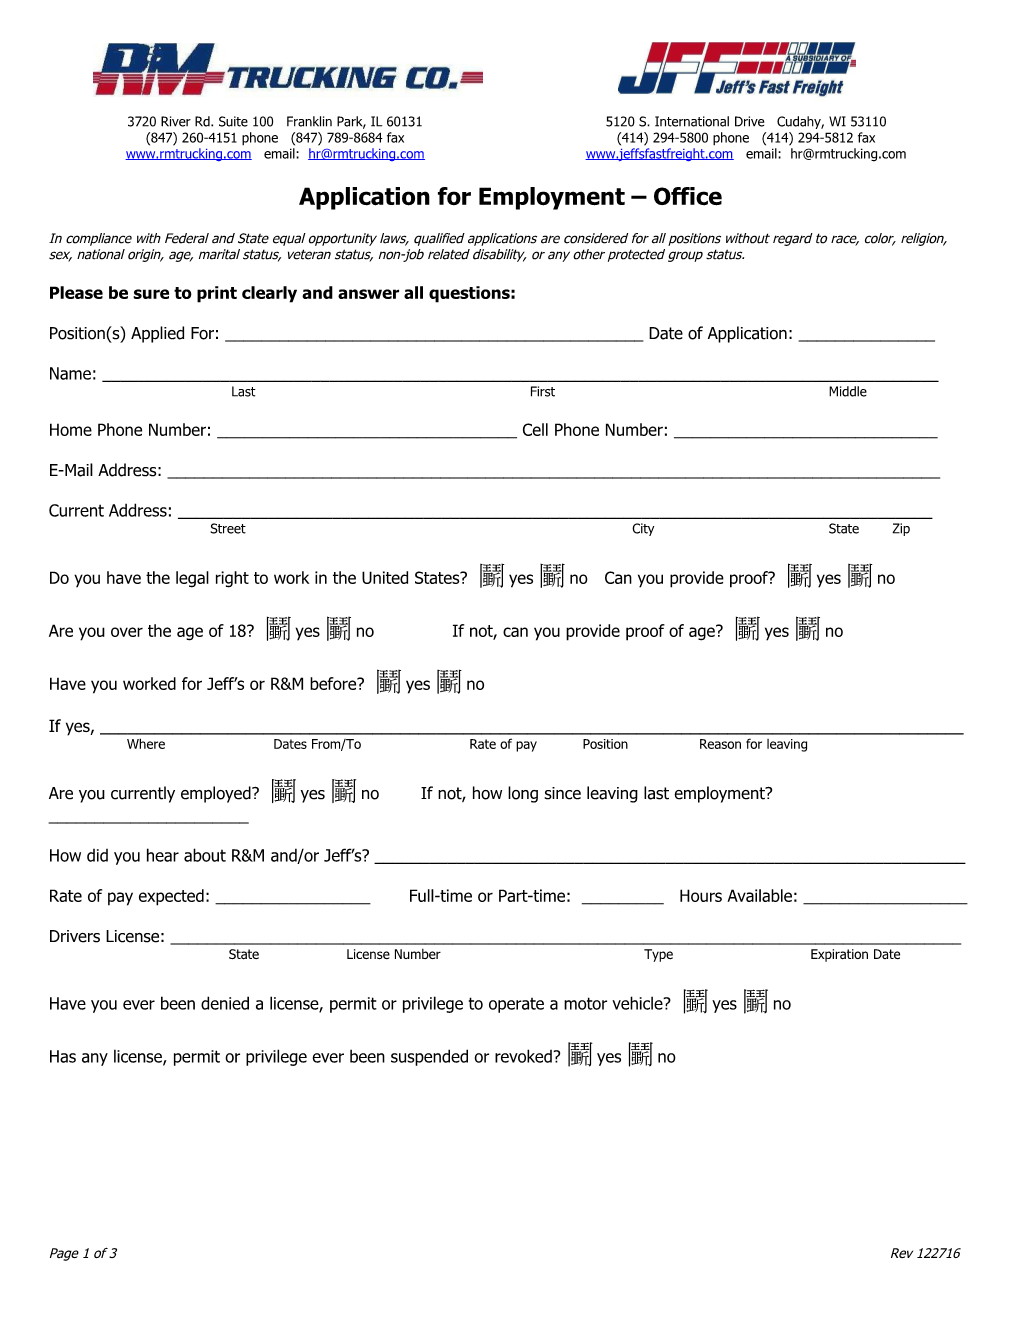 Application for Employment Office